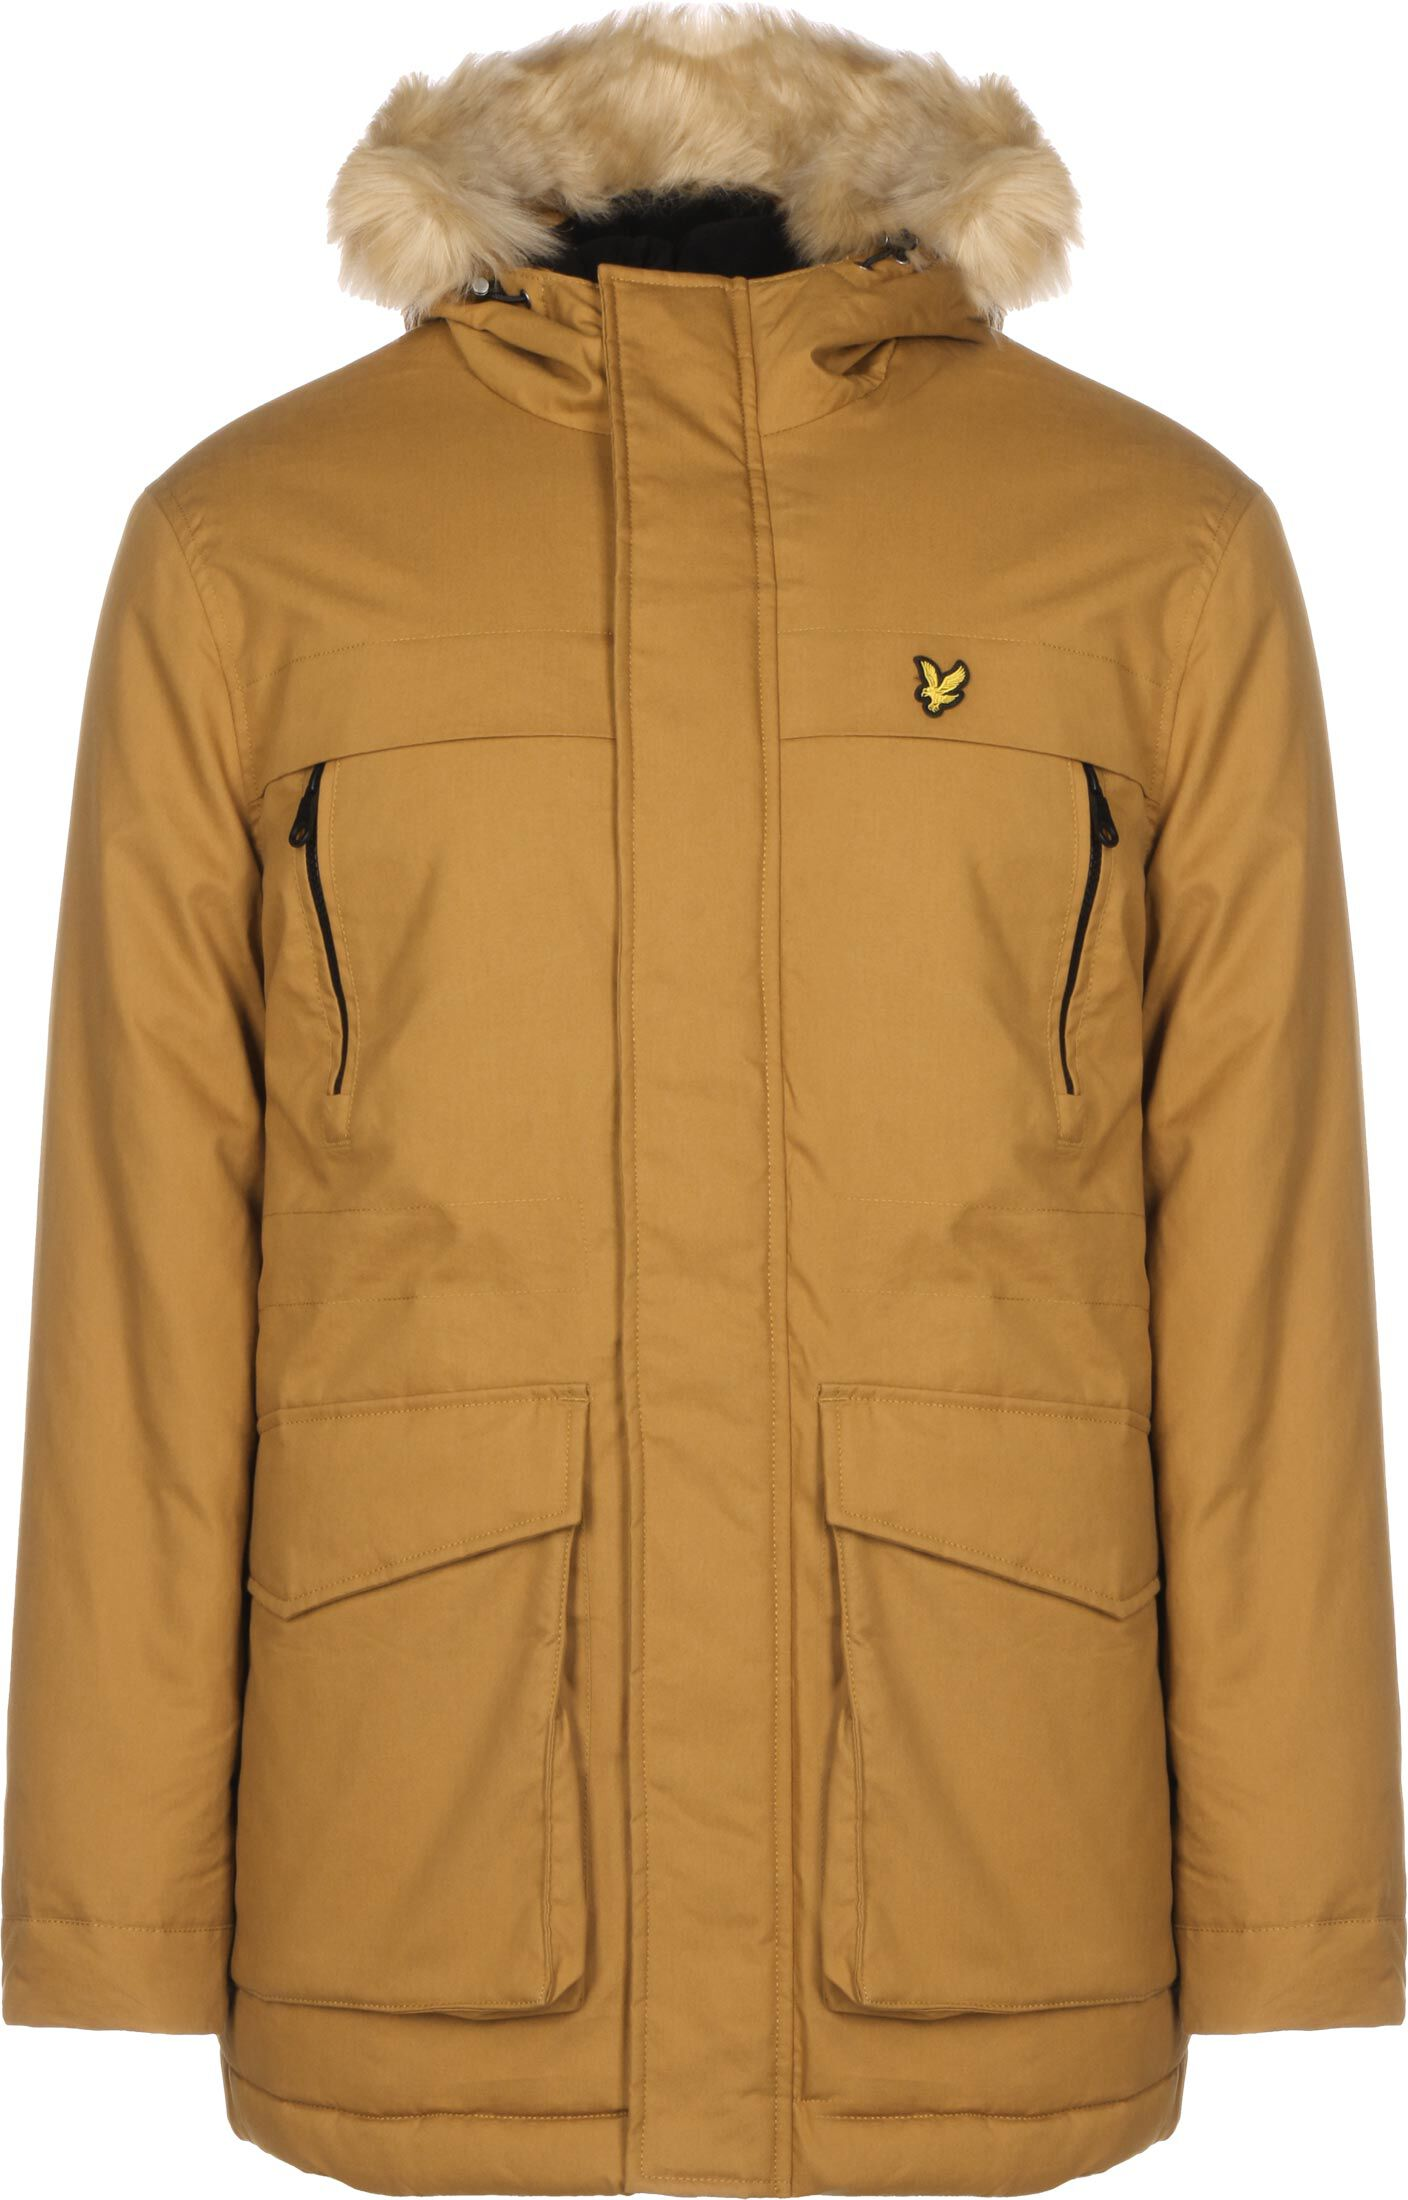 Lyle and Scott Winter Weight Micro Fleece Lined Parka Gold